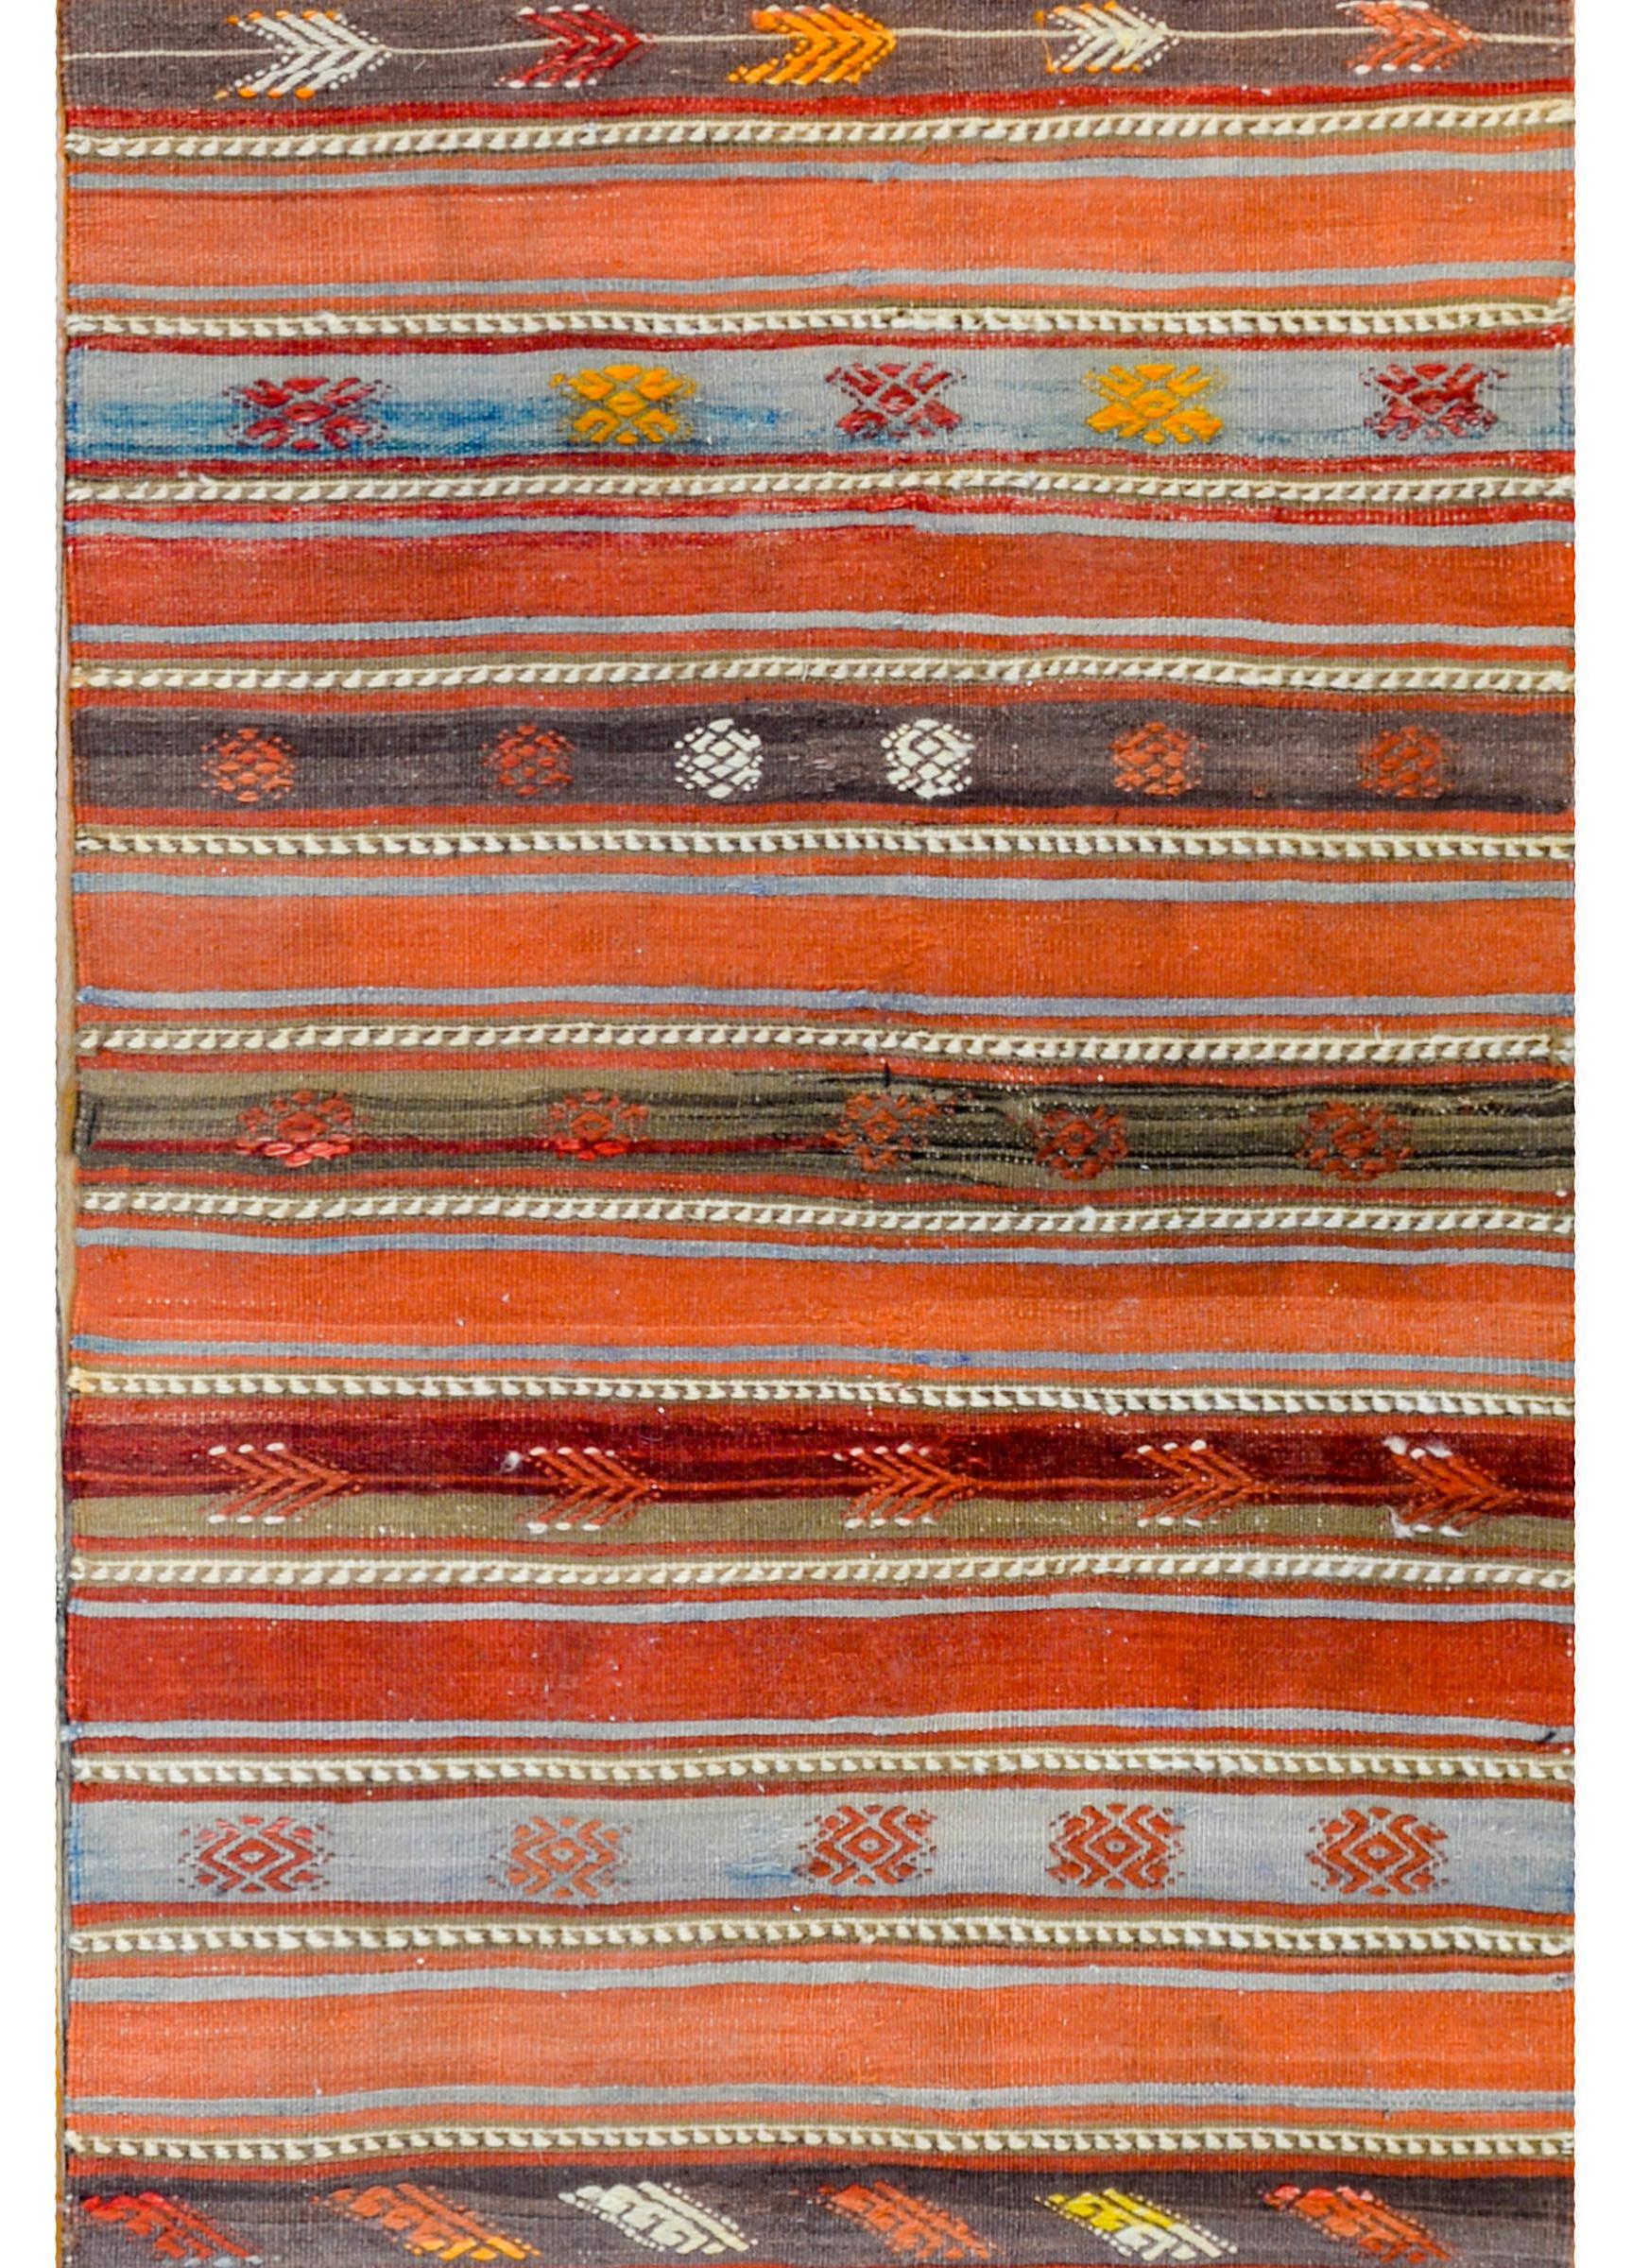 A bold vintage Turkish Konya Kilim runner with alternating solid and patterned stripes woven in crimson, orange, light indigo, brown, and white vegetable dyed wool.